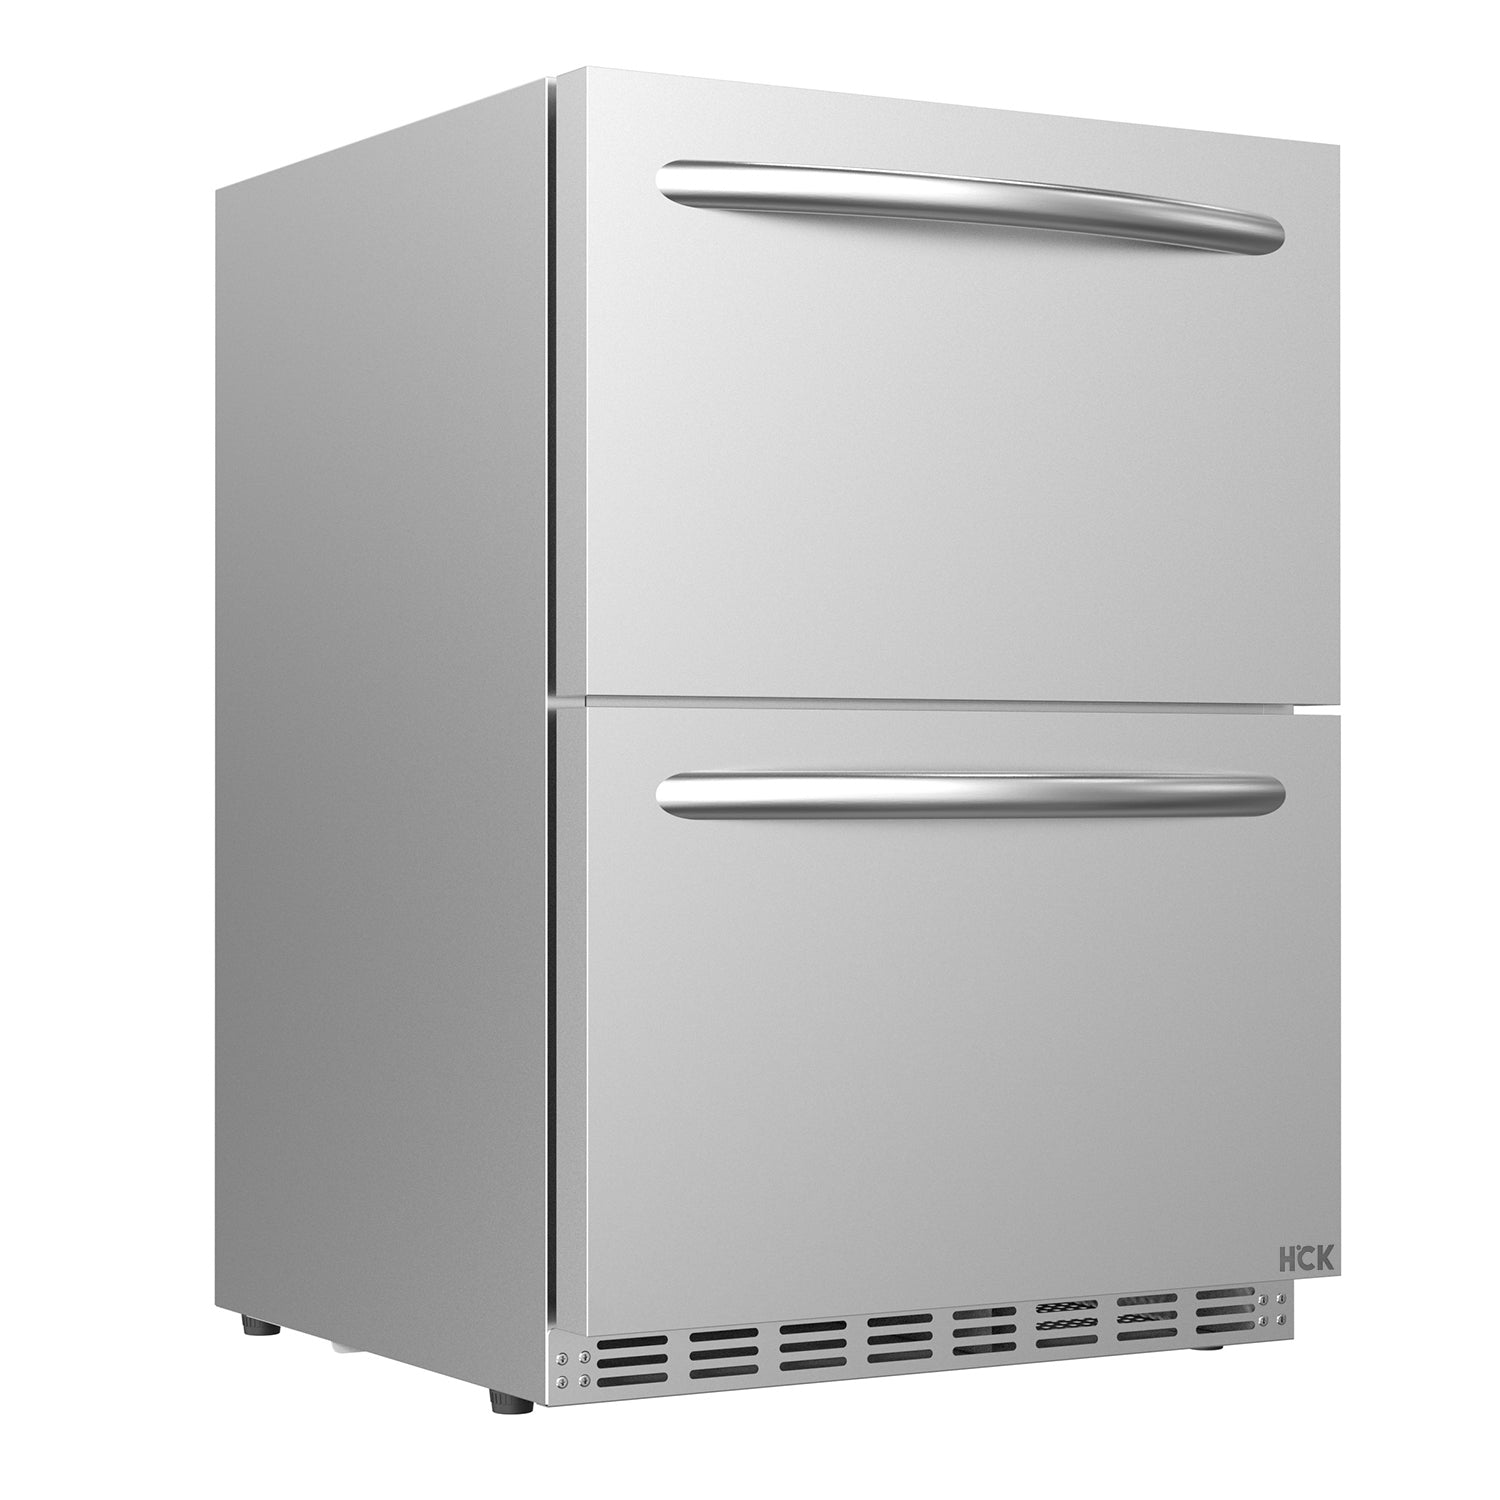 HCK 24 inch Weather Proof Design Indoor and Outdoor Undercounter Drawer Fridge, Built-in Beverage Refrigerator for Home and Commercial Use, Stainless